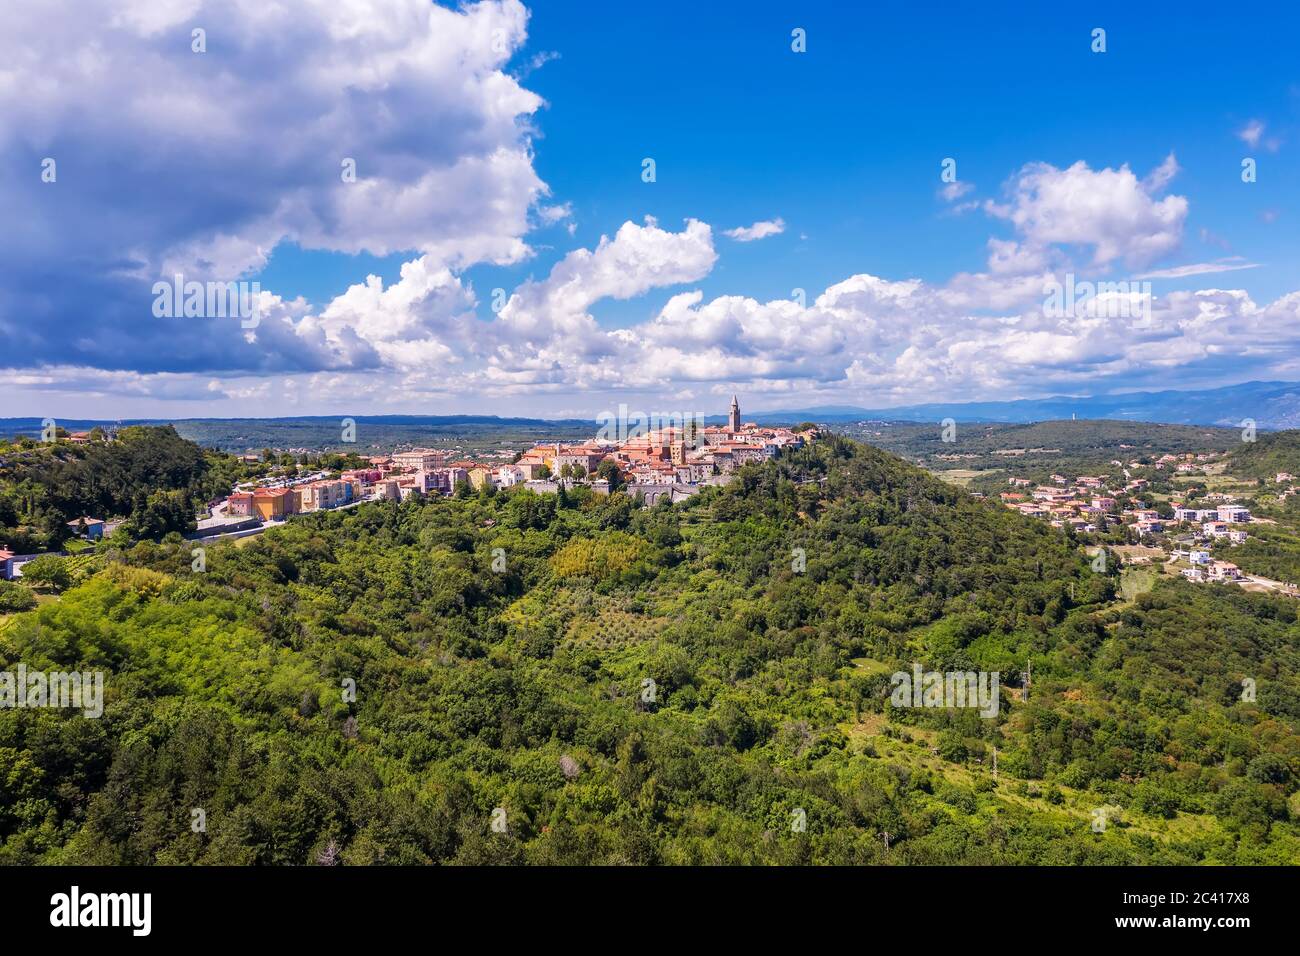 an aerial view of old town Labin, Istria, Croatia Stock Photo